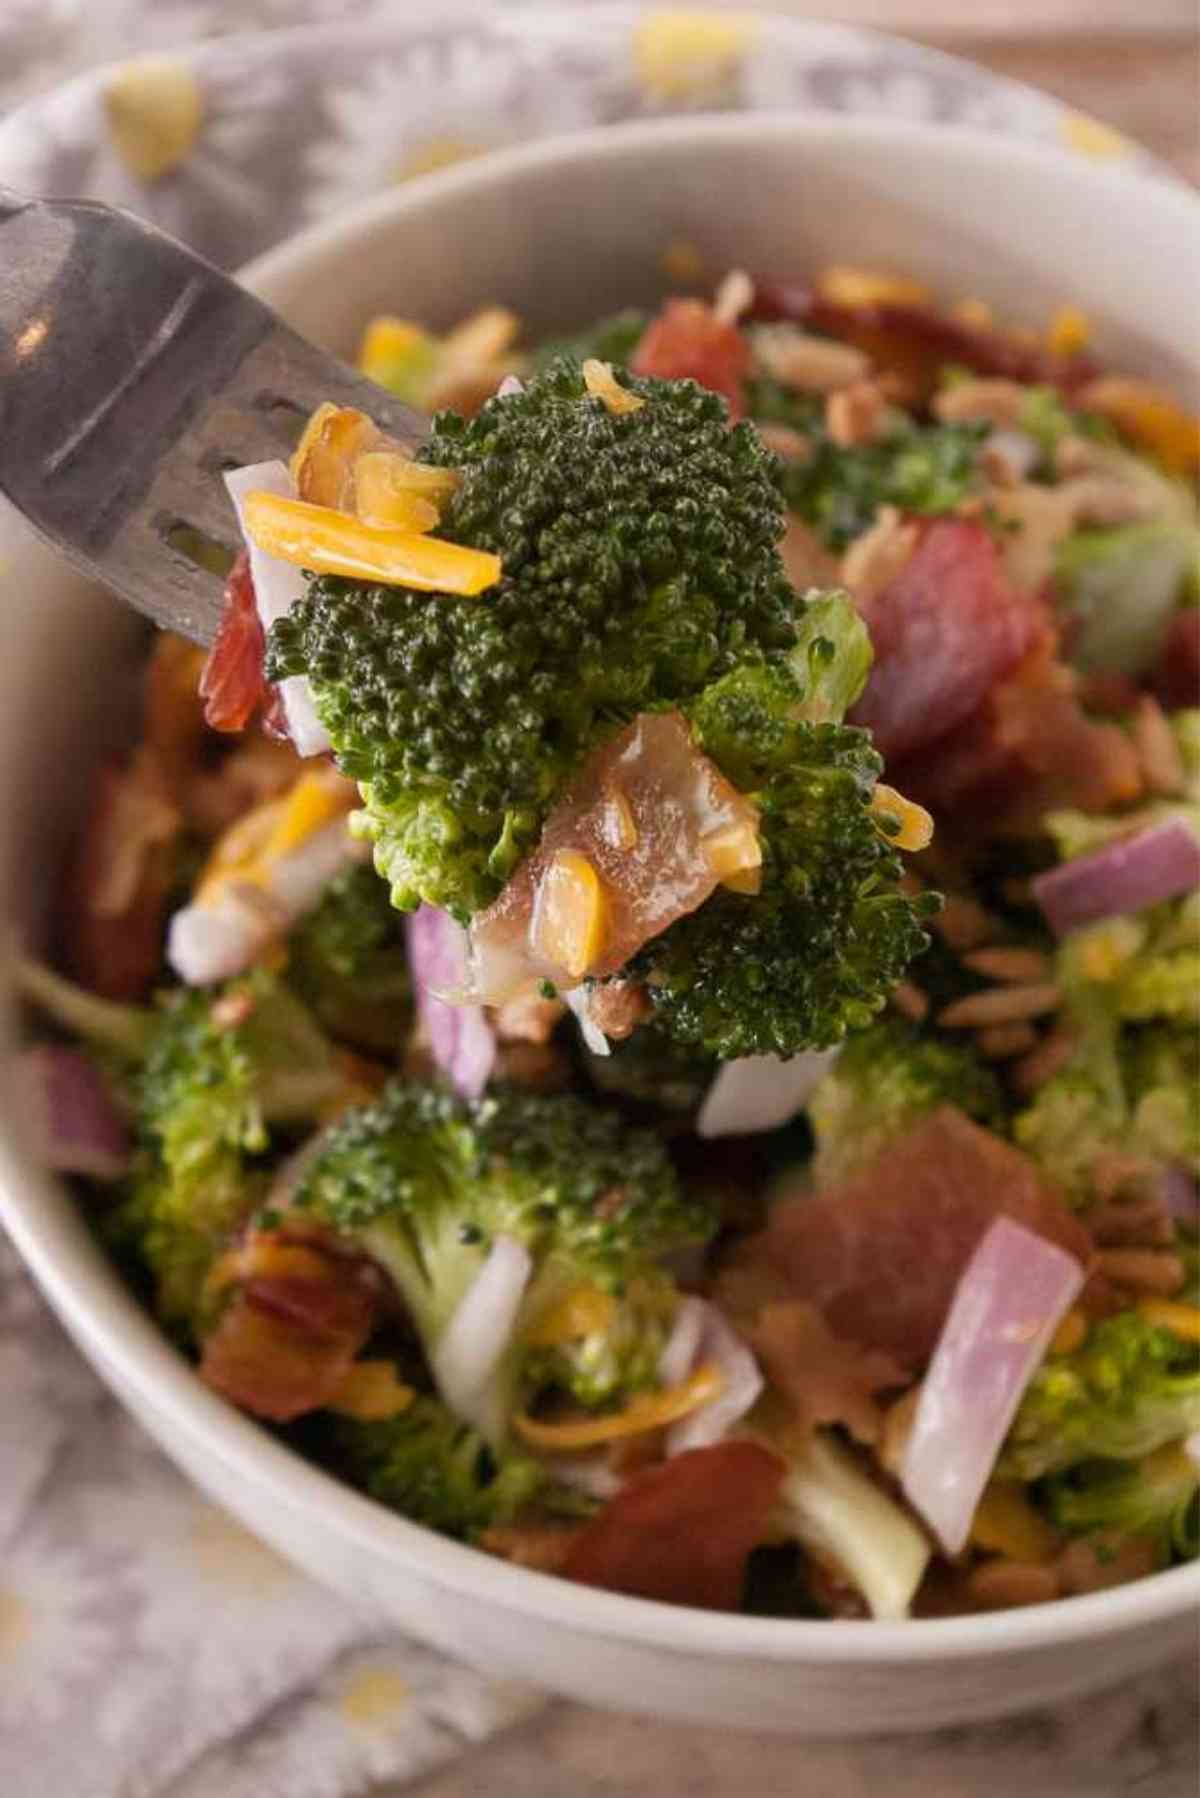 Bowlful of broccoli salad with a forkful being lifted out.